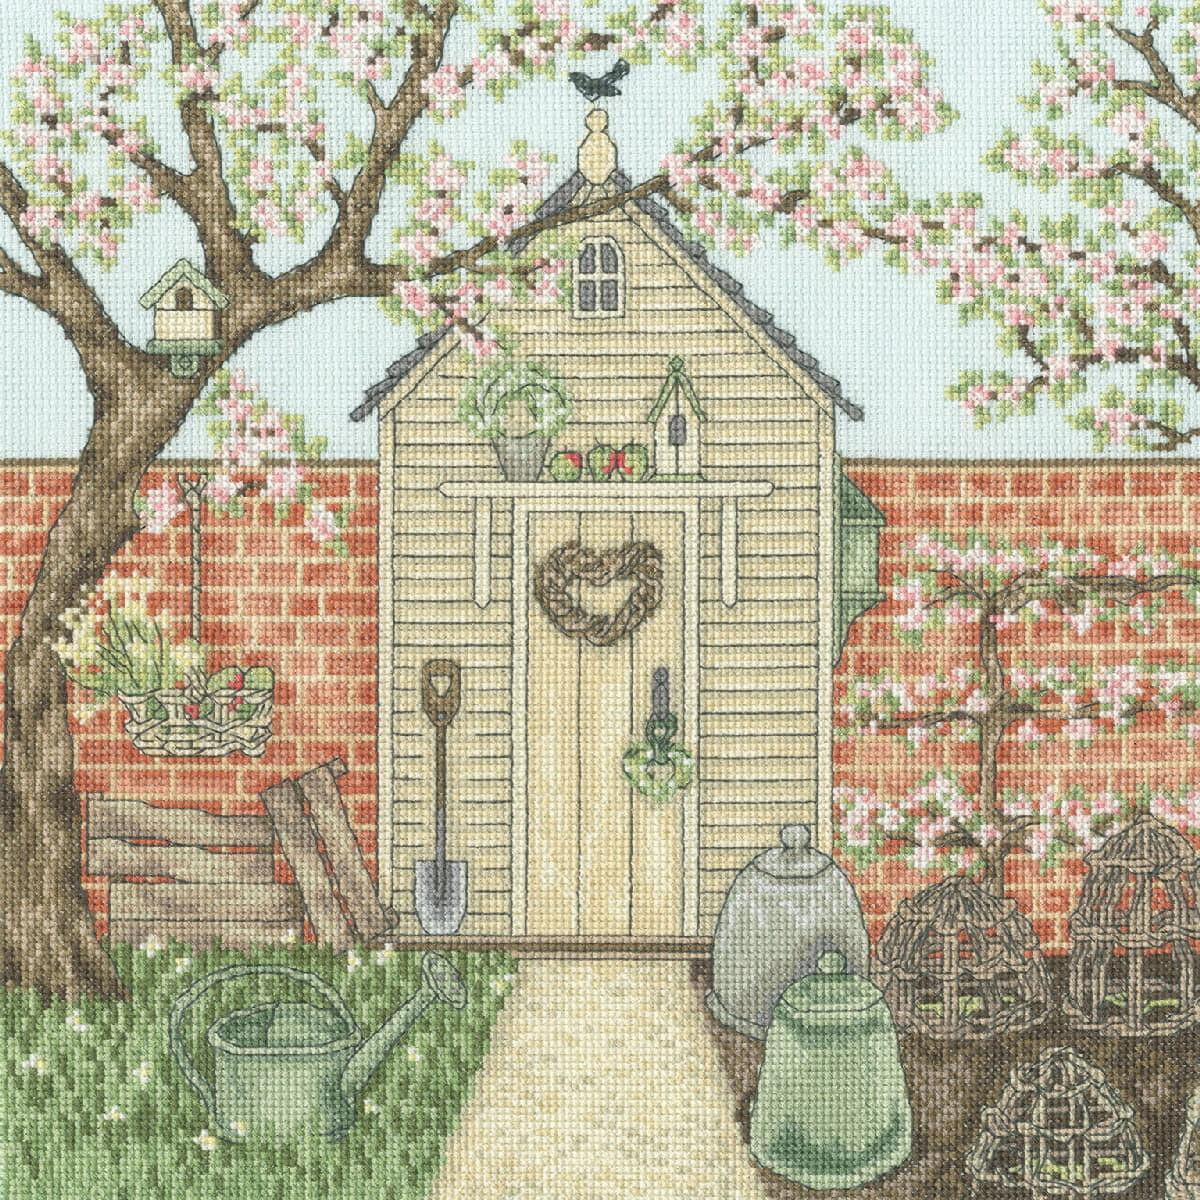 A picturesque wooden garden shed is decorated with spring...